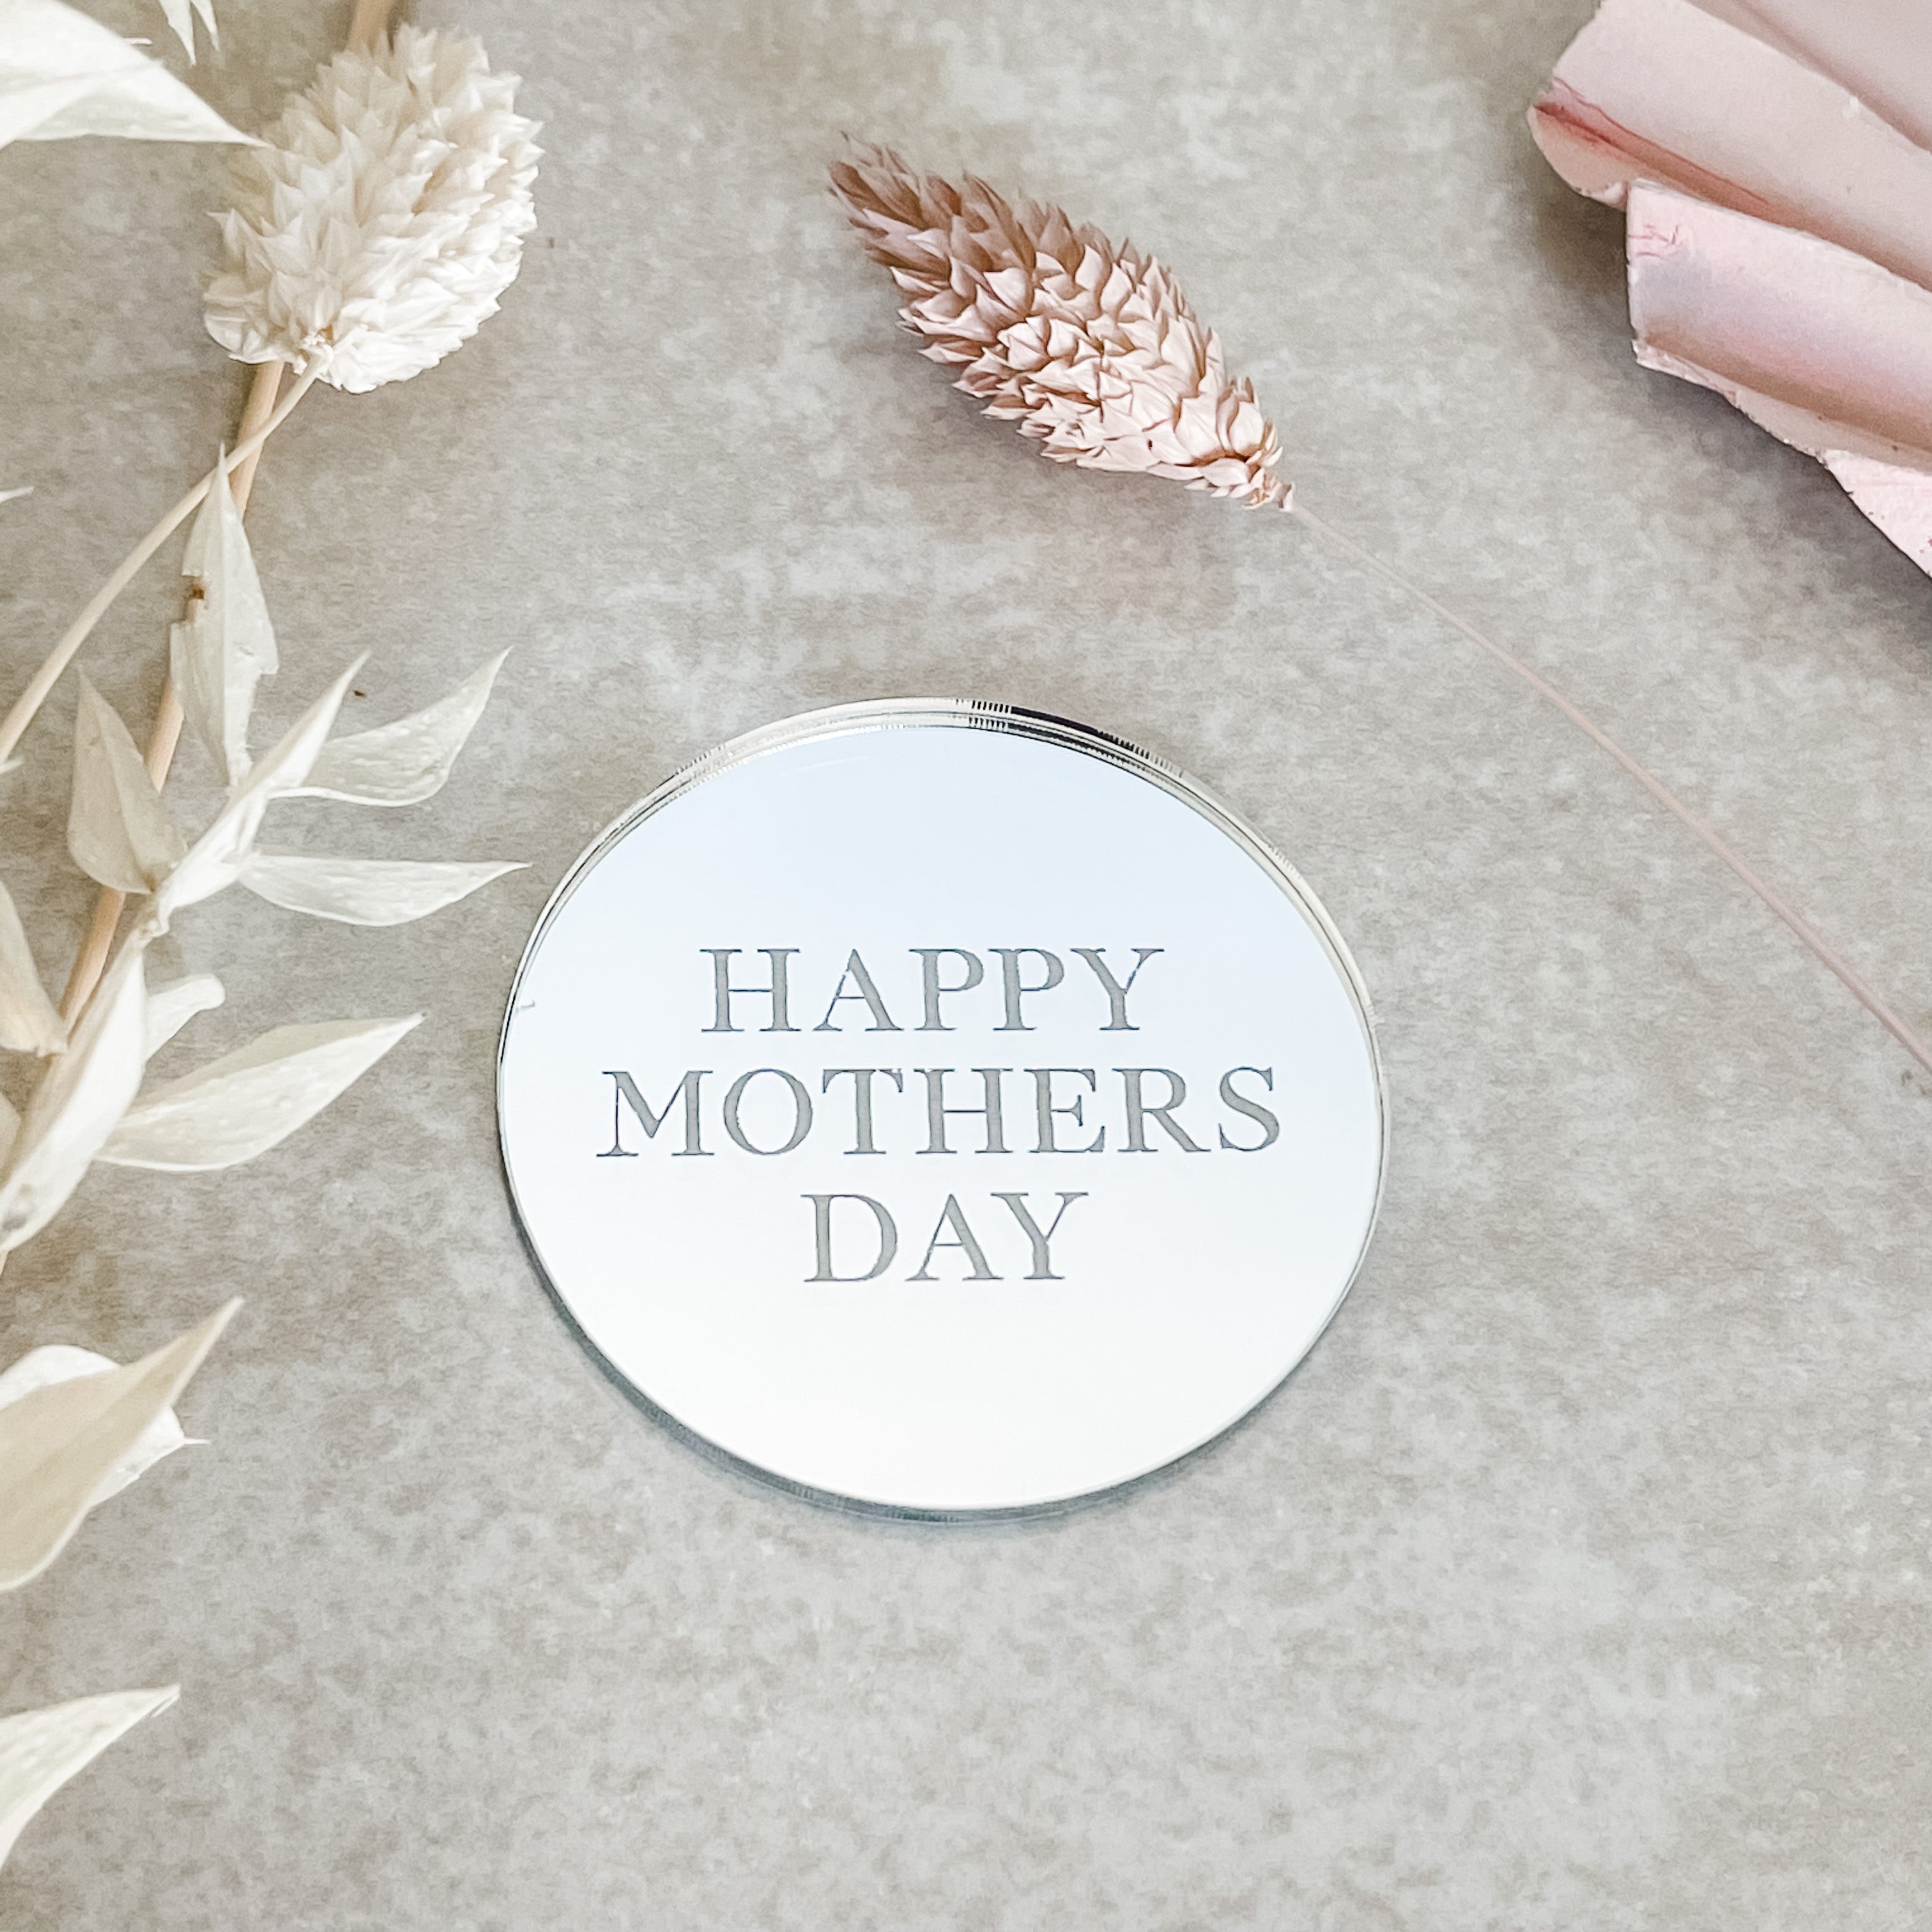 Engraved Mother's Day Baking Tags